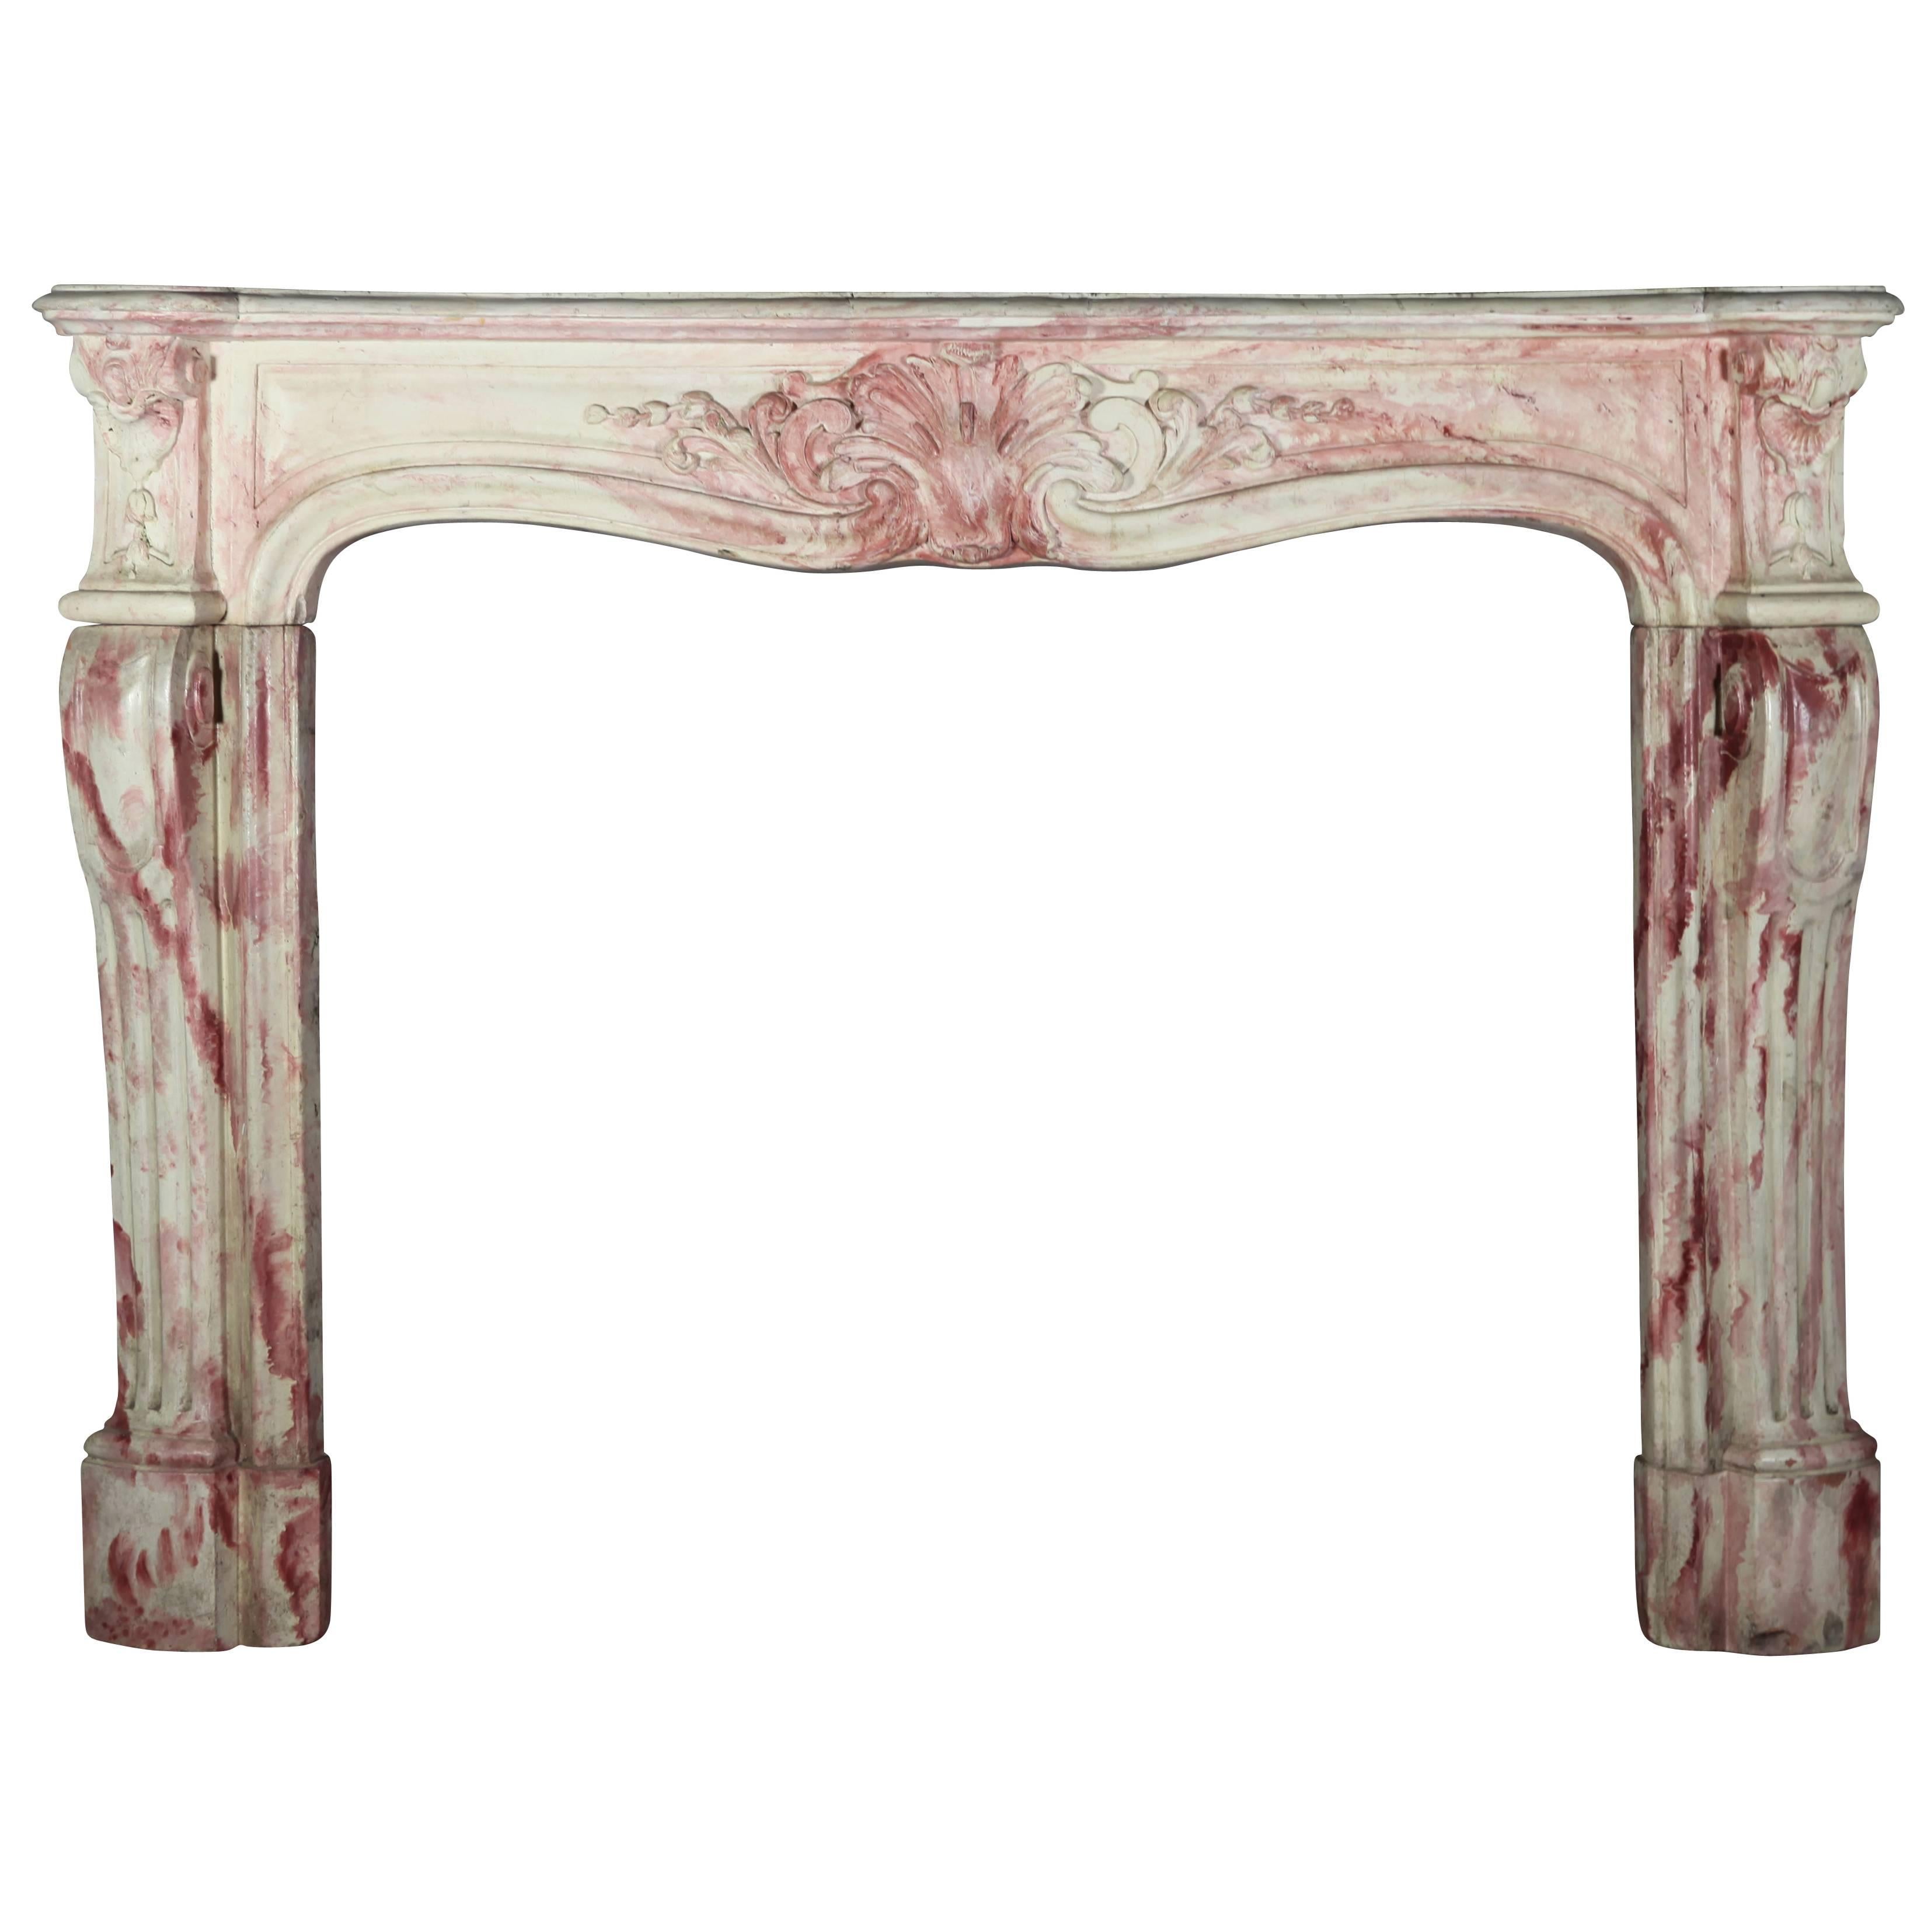 19th Century Terra Cotta Fireplace Mantel in the Style of Louis XV For Sale